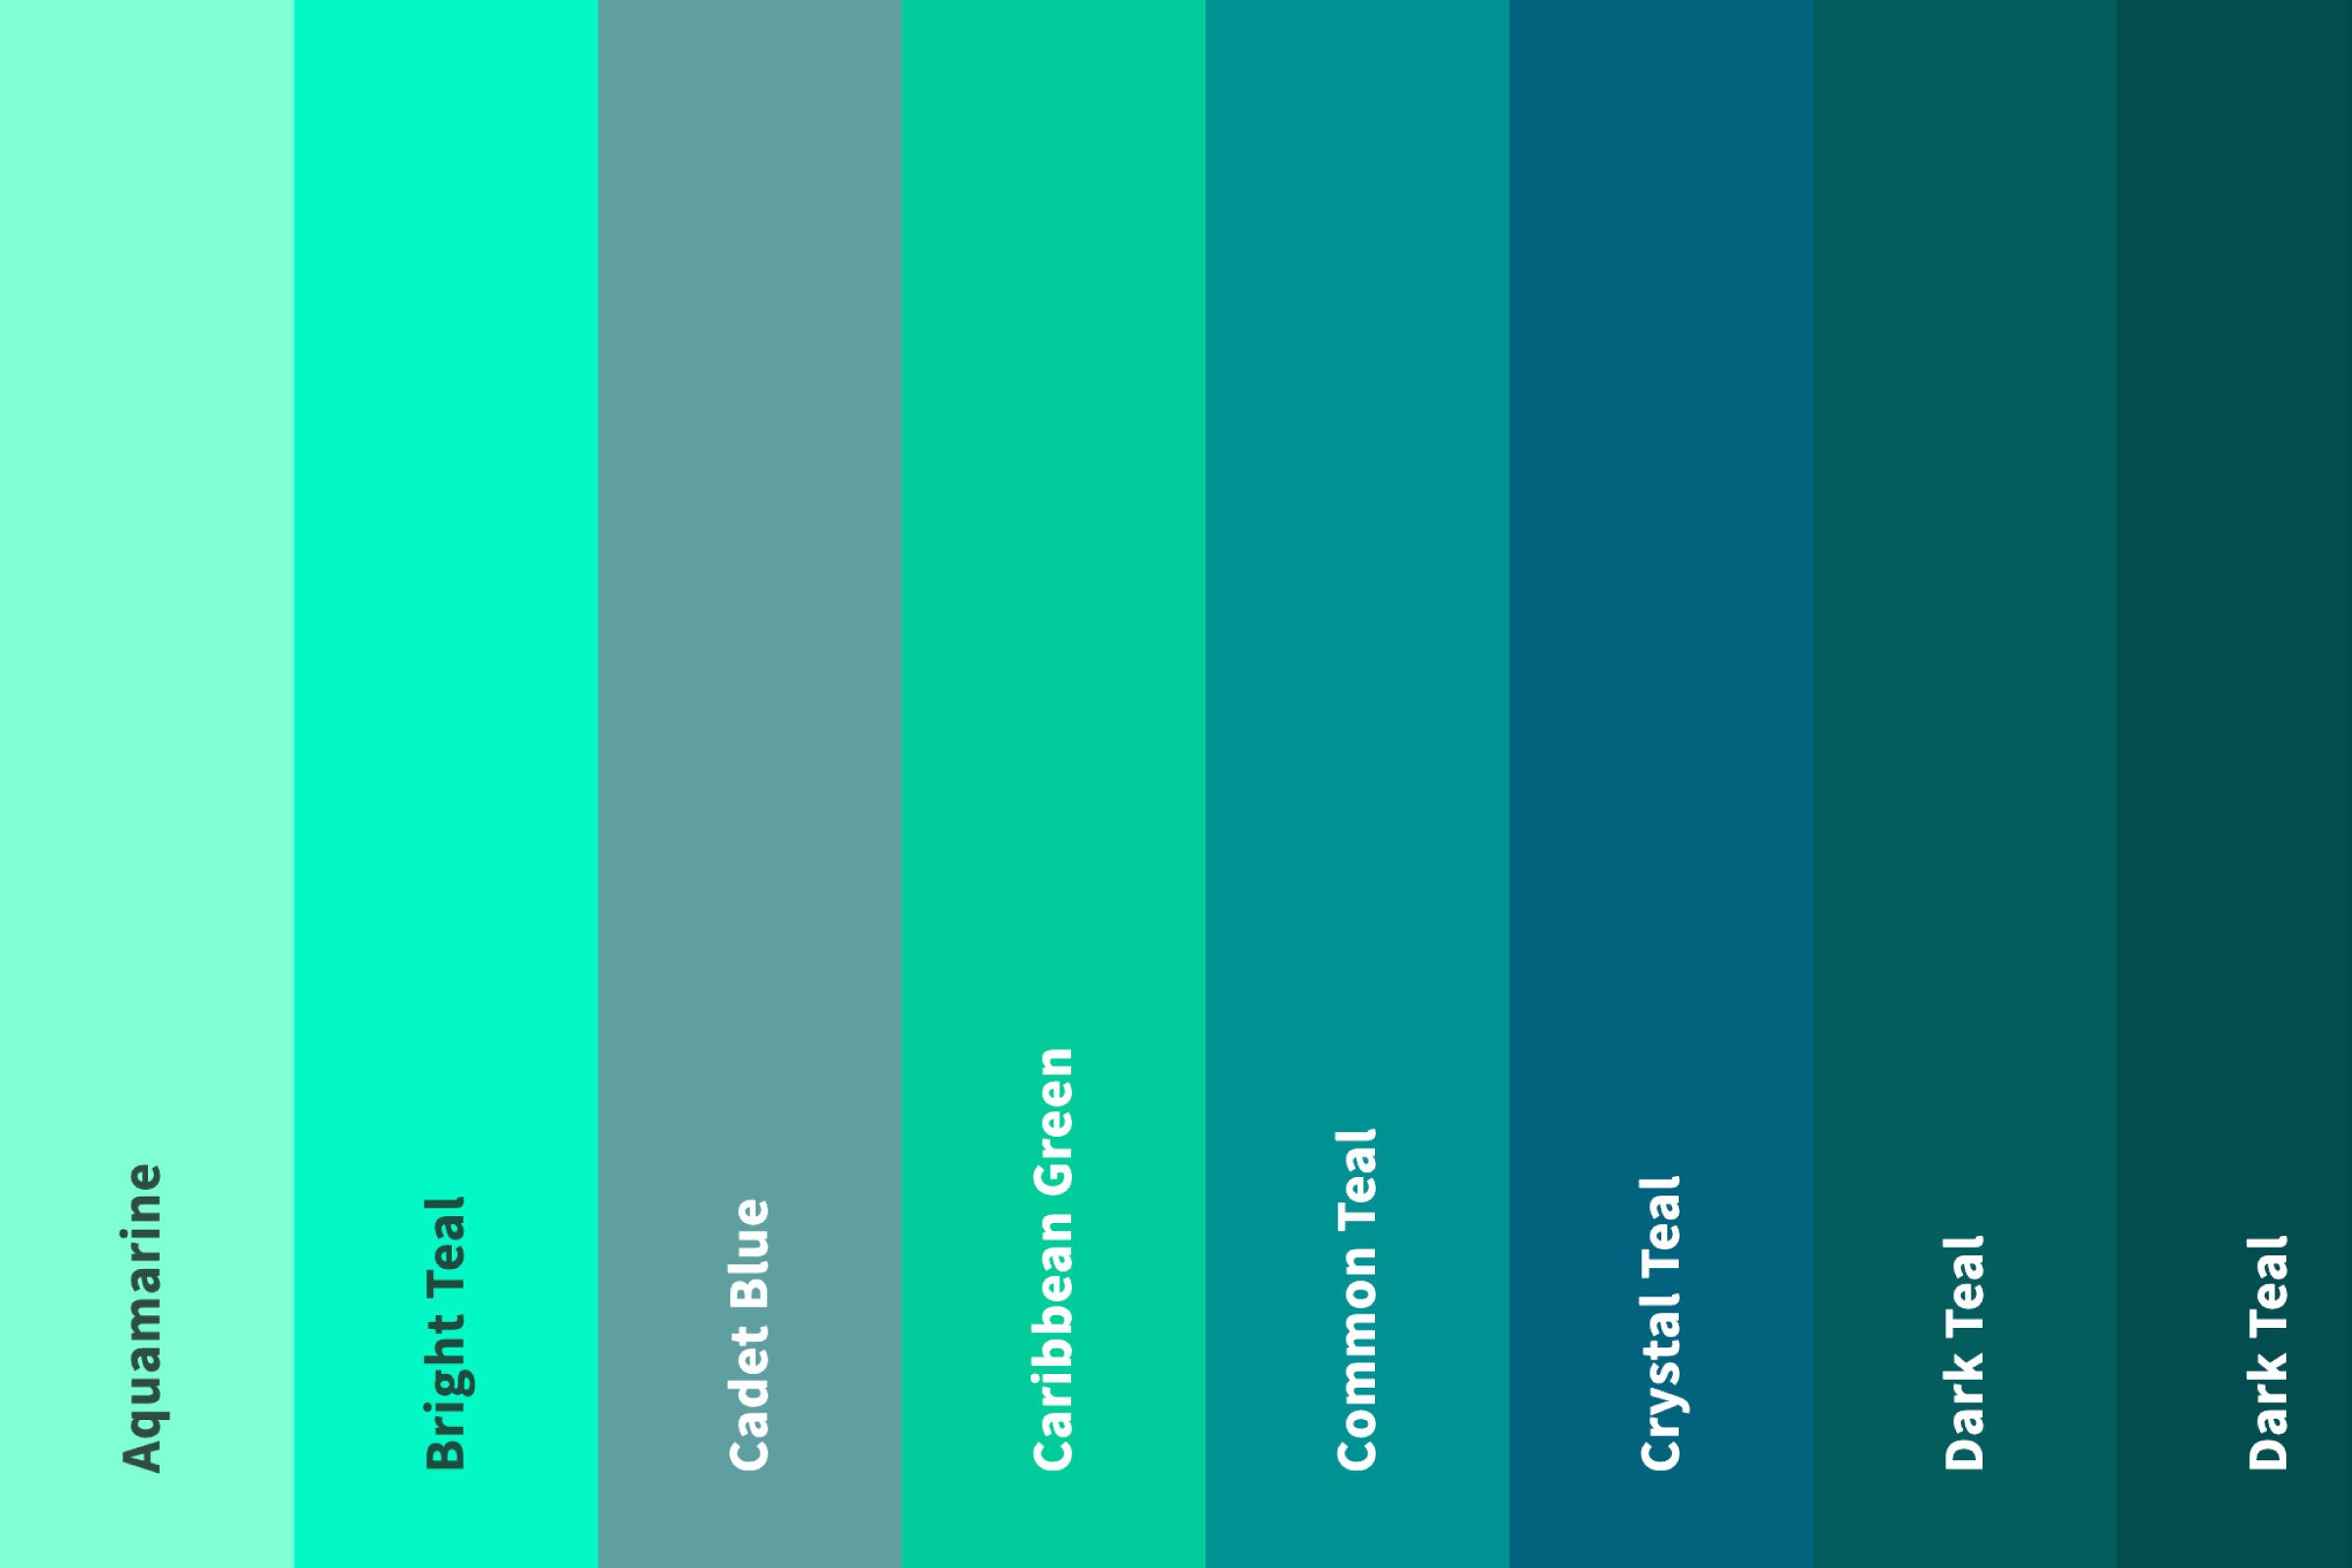 Bluish Green Color Chart